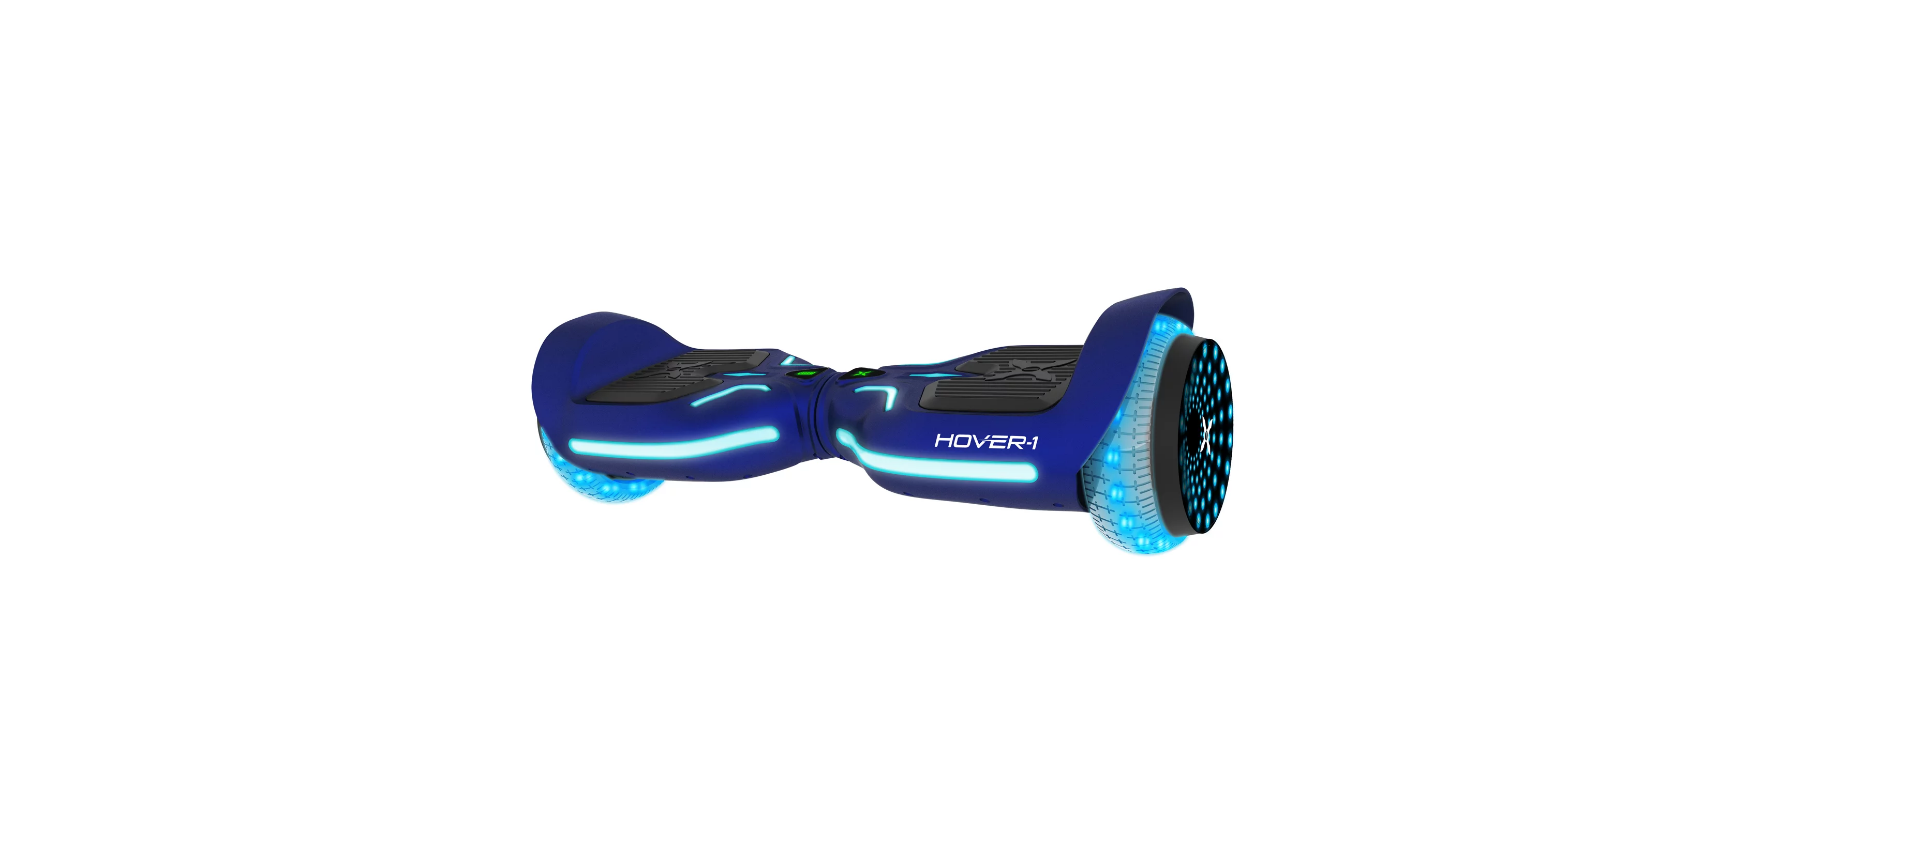 HOVER-1 082-07-4142 AXLE Kids Hoverboard